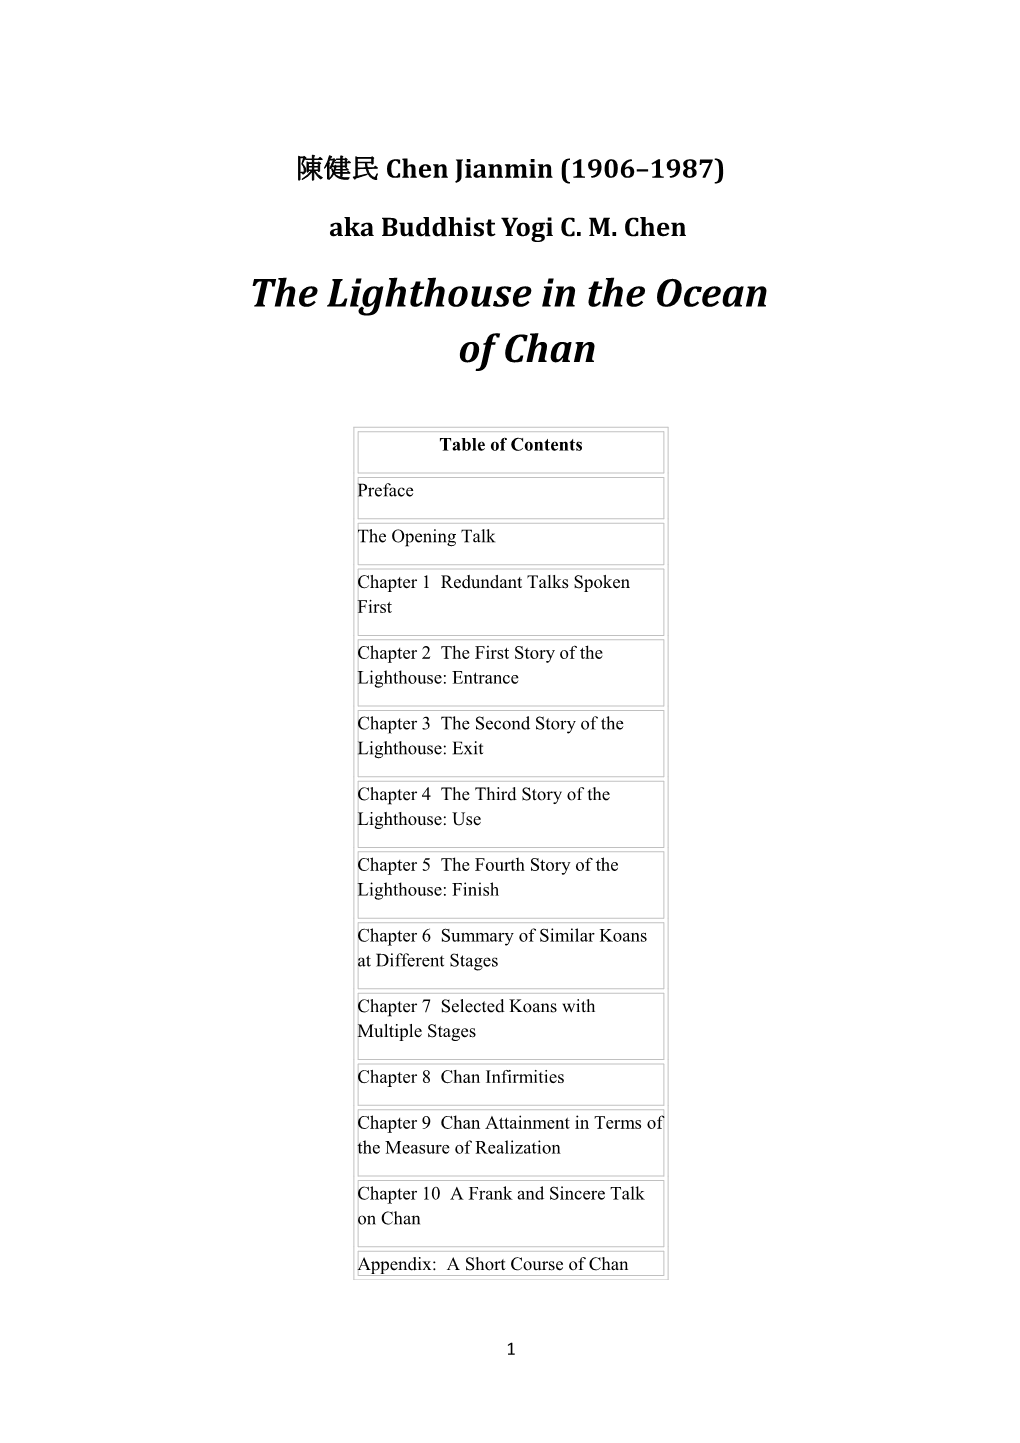 The Lighthouse in the Ocean of Chan by Buddhist Yogi C.M. Chen